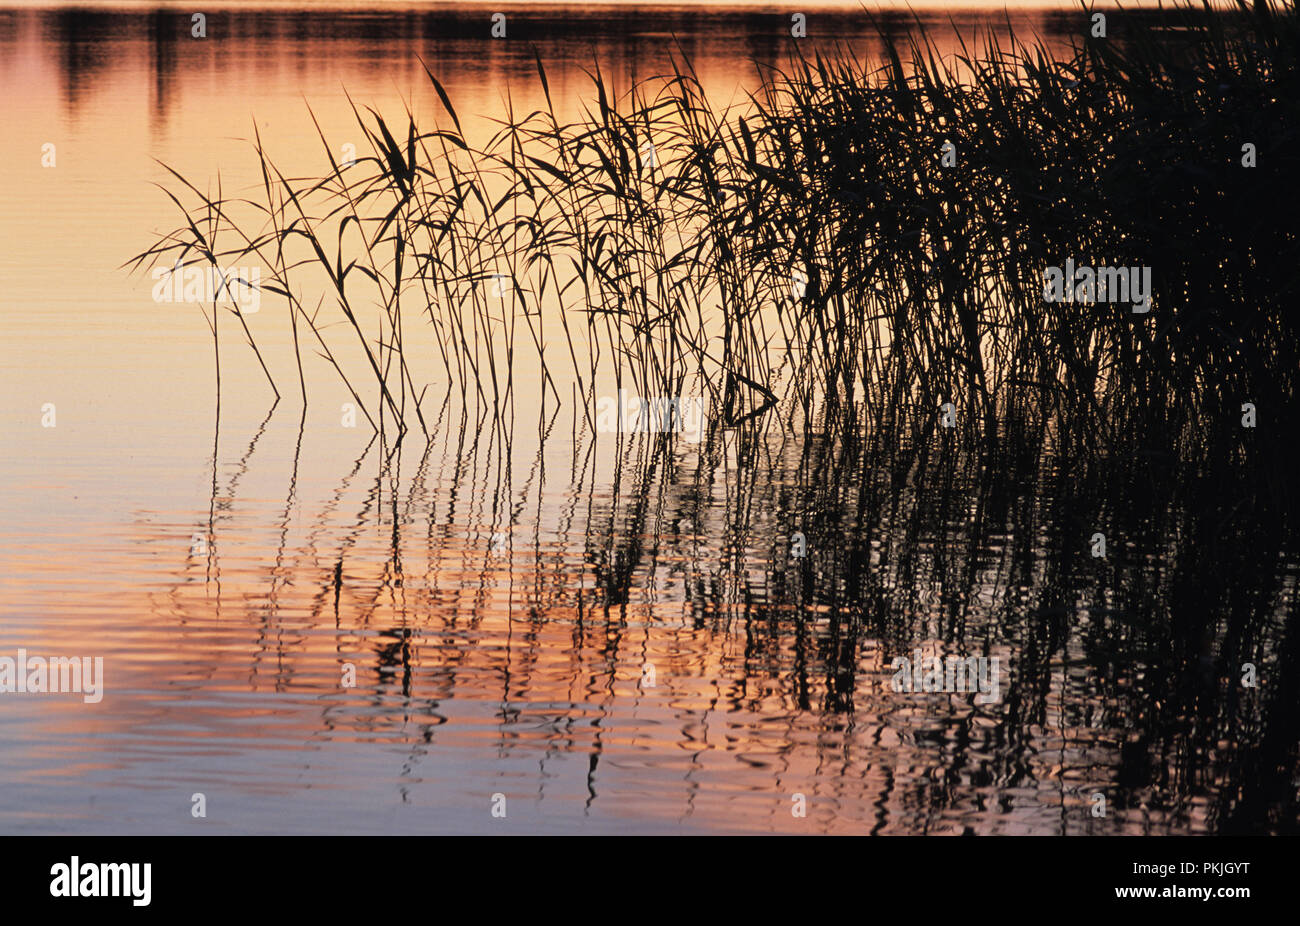 Sunset and reeds on a lake in Mazury region of Poland June 2007 Stock Photo